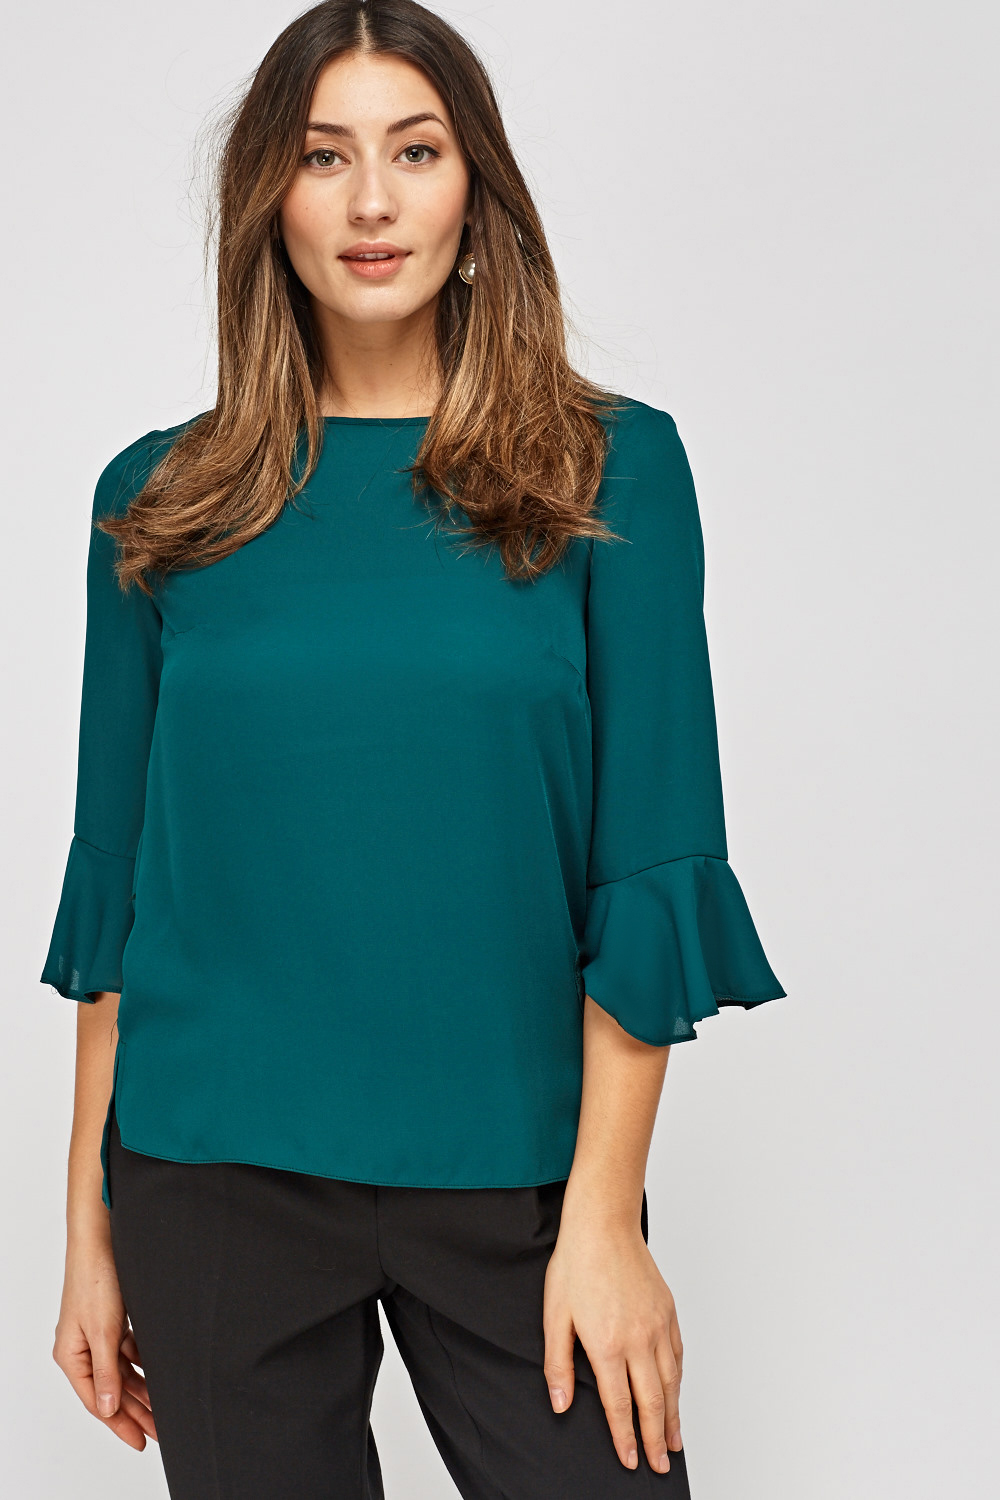 Forest Green Sheer Blouse - Just $7